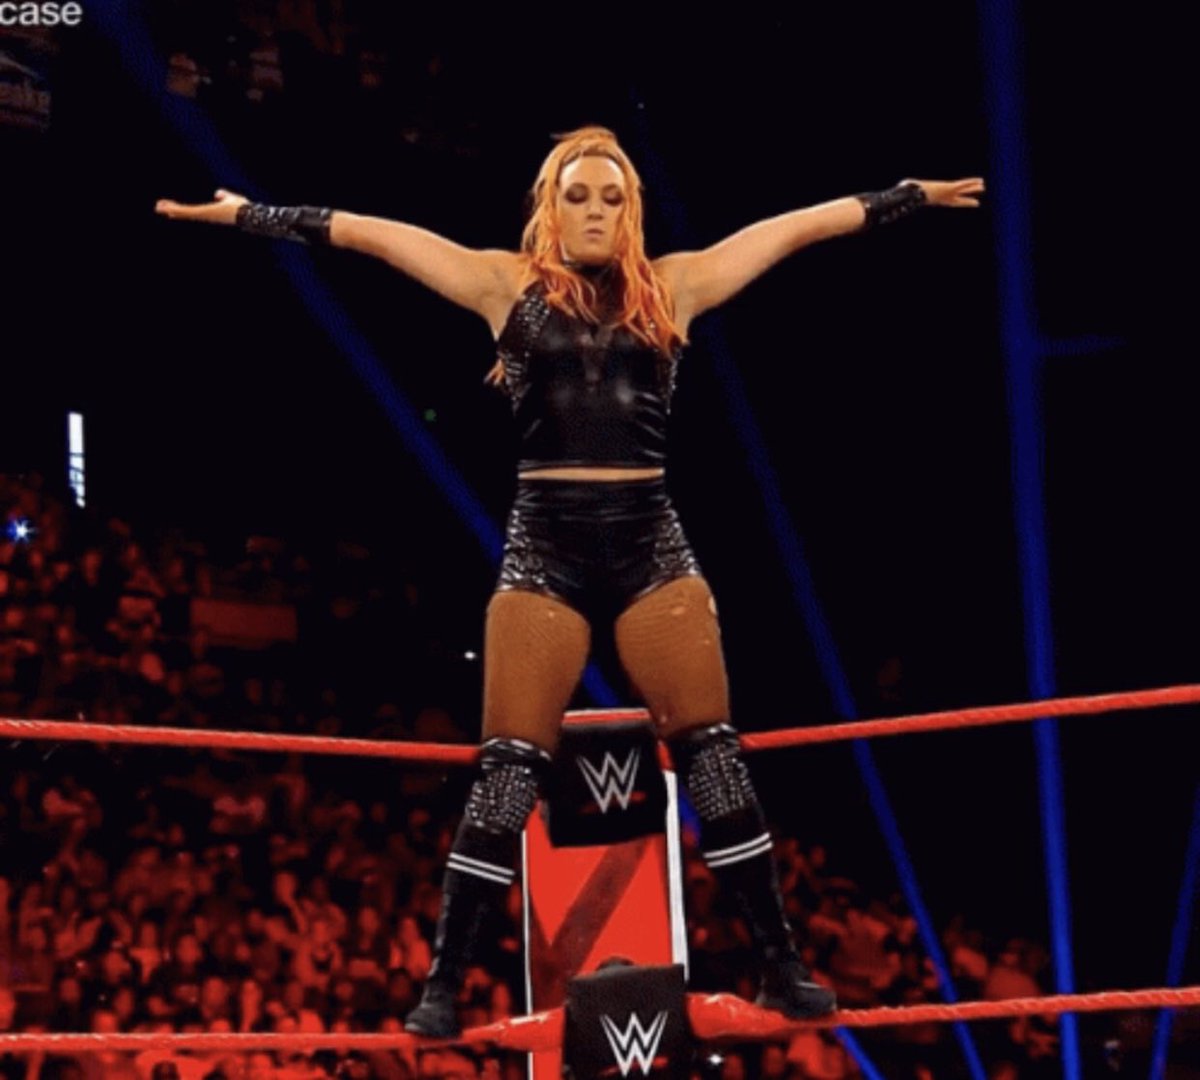 Next is her black and silver gear. Pretty underrated ngl. It was worn a couple of times, most recognizably at summerslam 19, and tlc 19. I would love for a comeback of this gear!